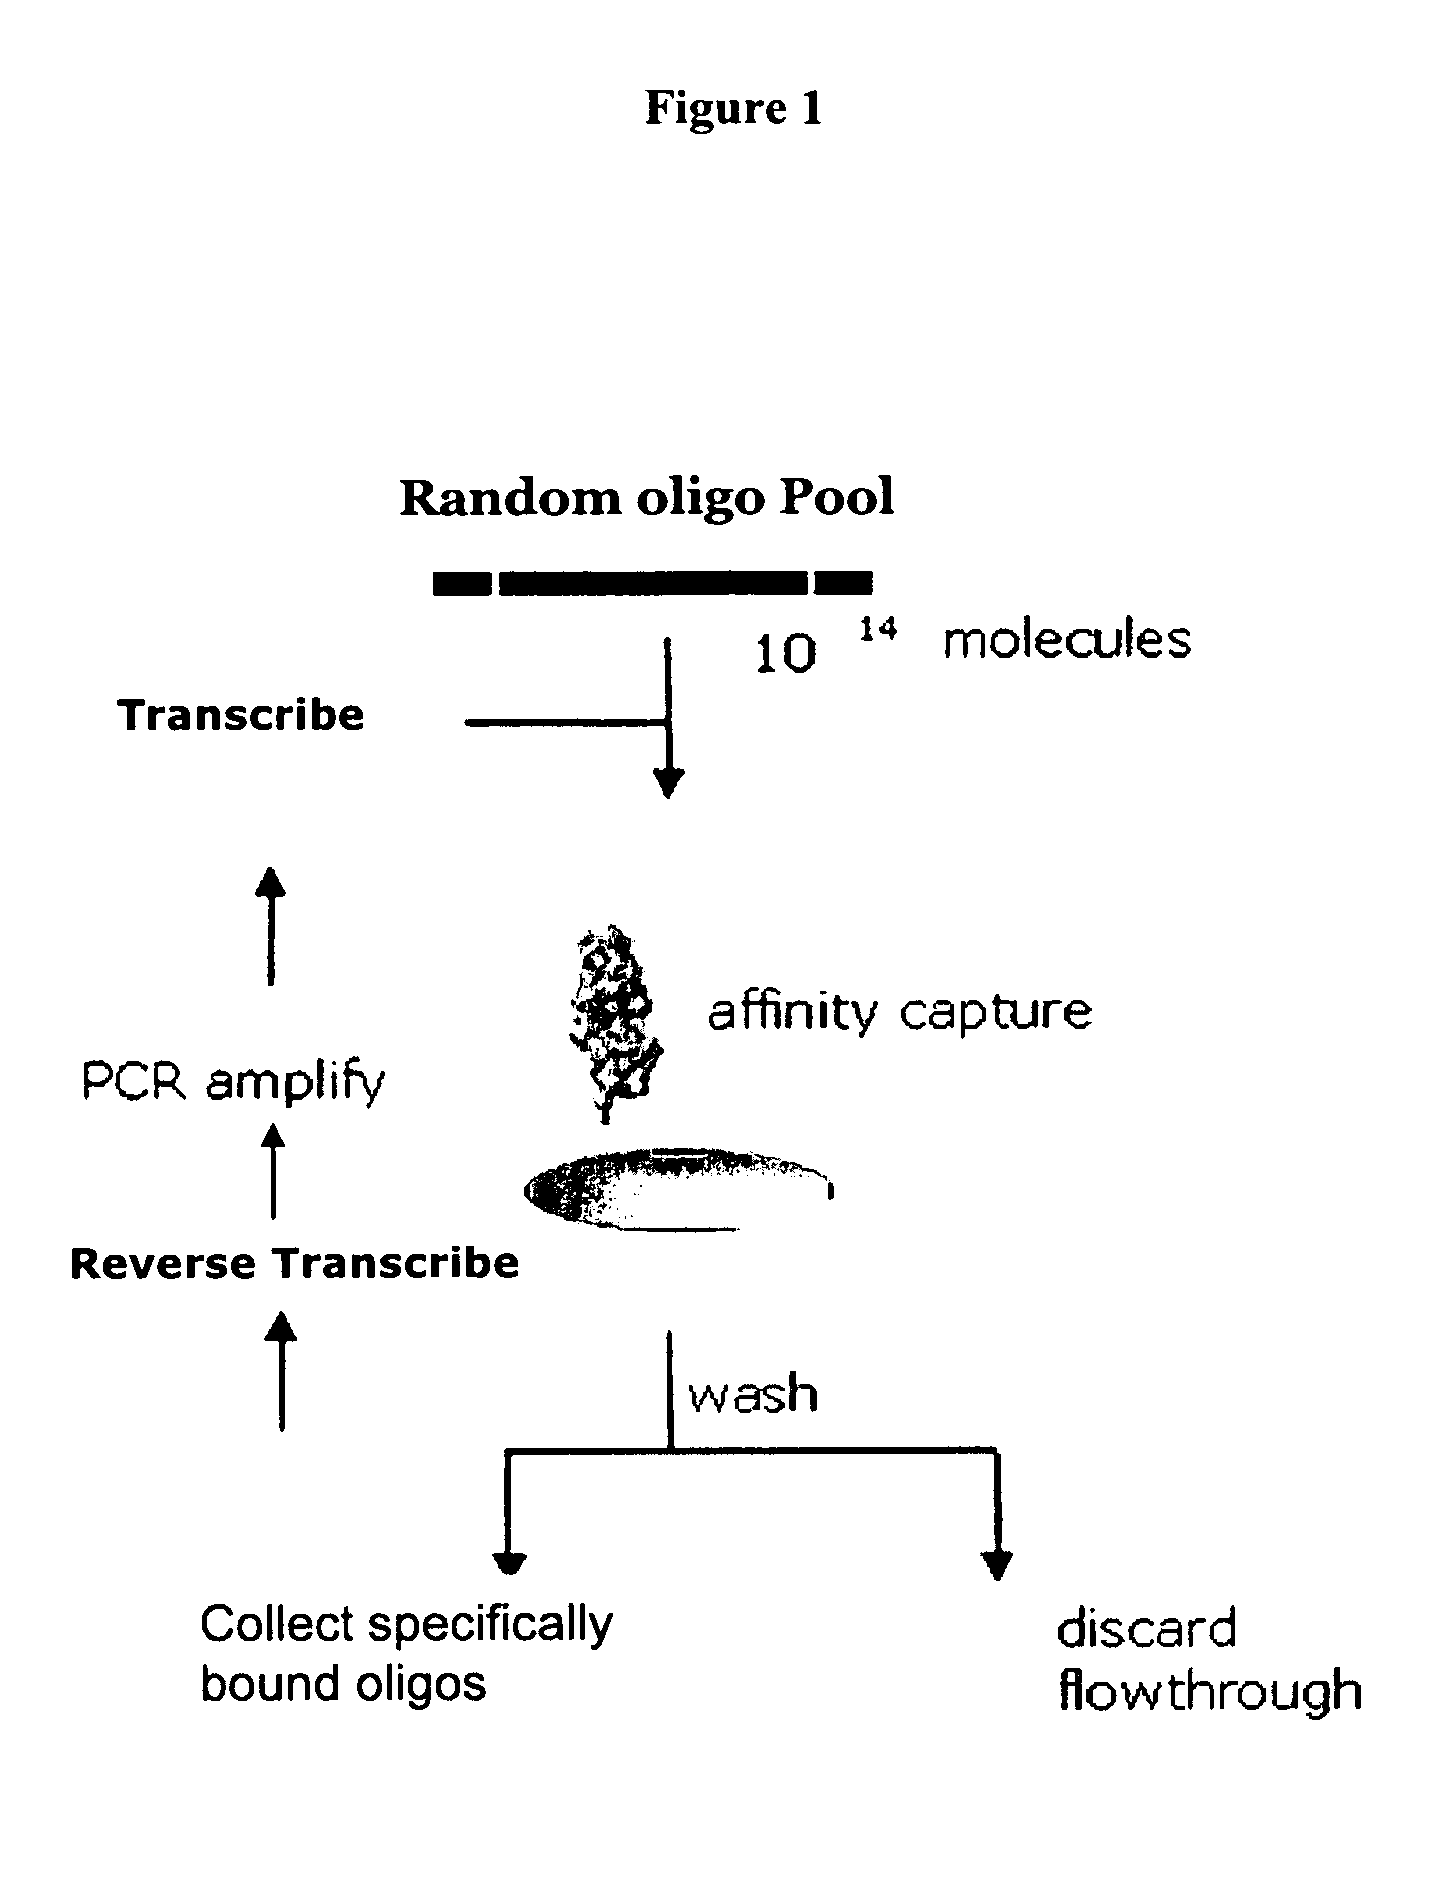 Materials and methods for the generation of fully 2'-modified nucleic acid transcripts